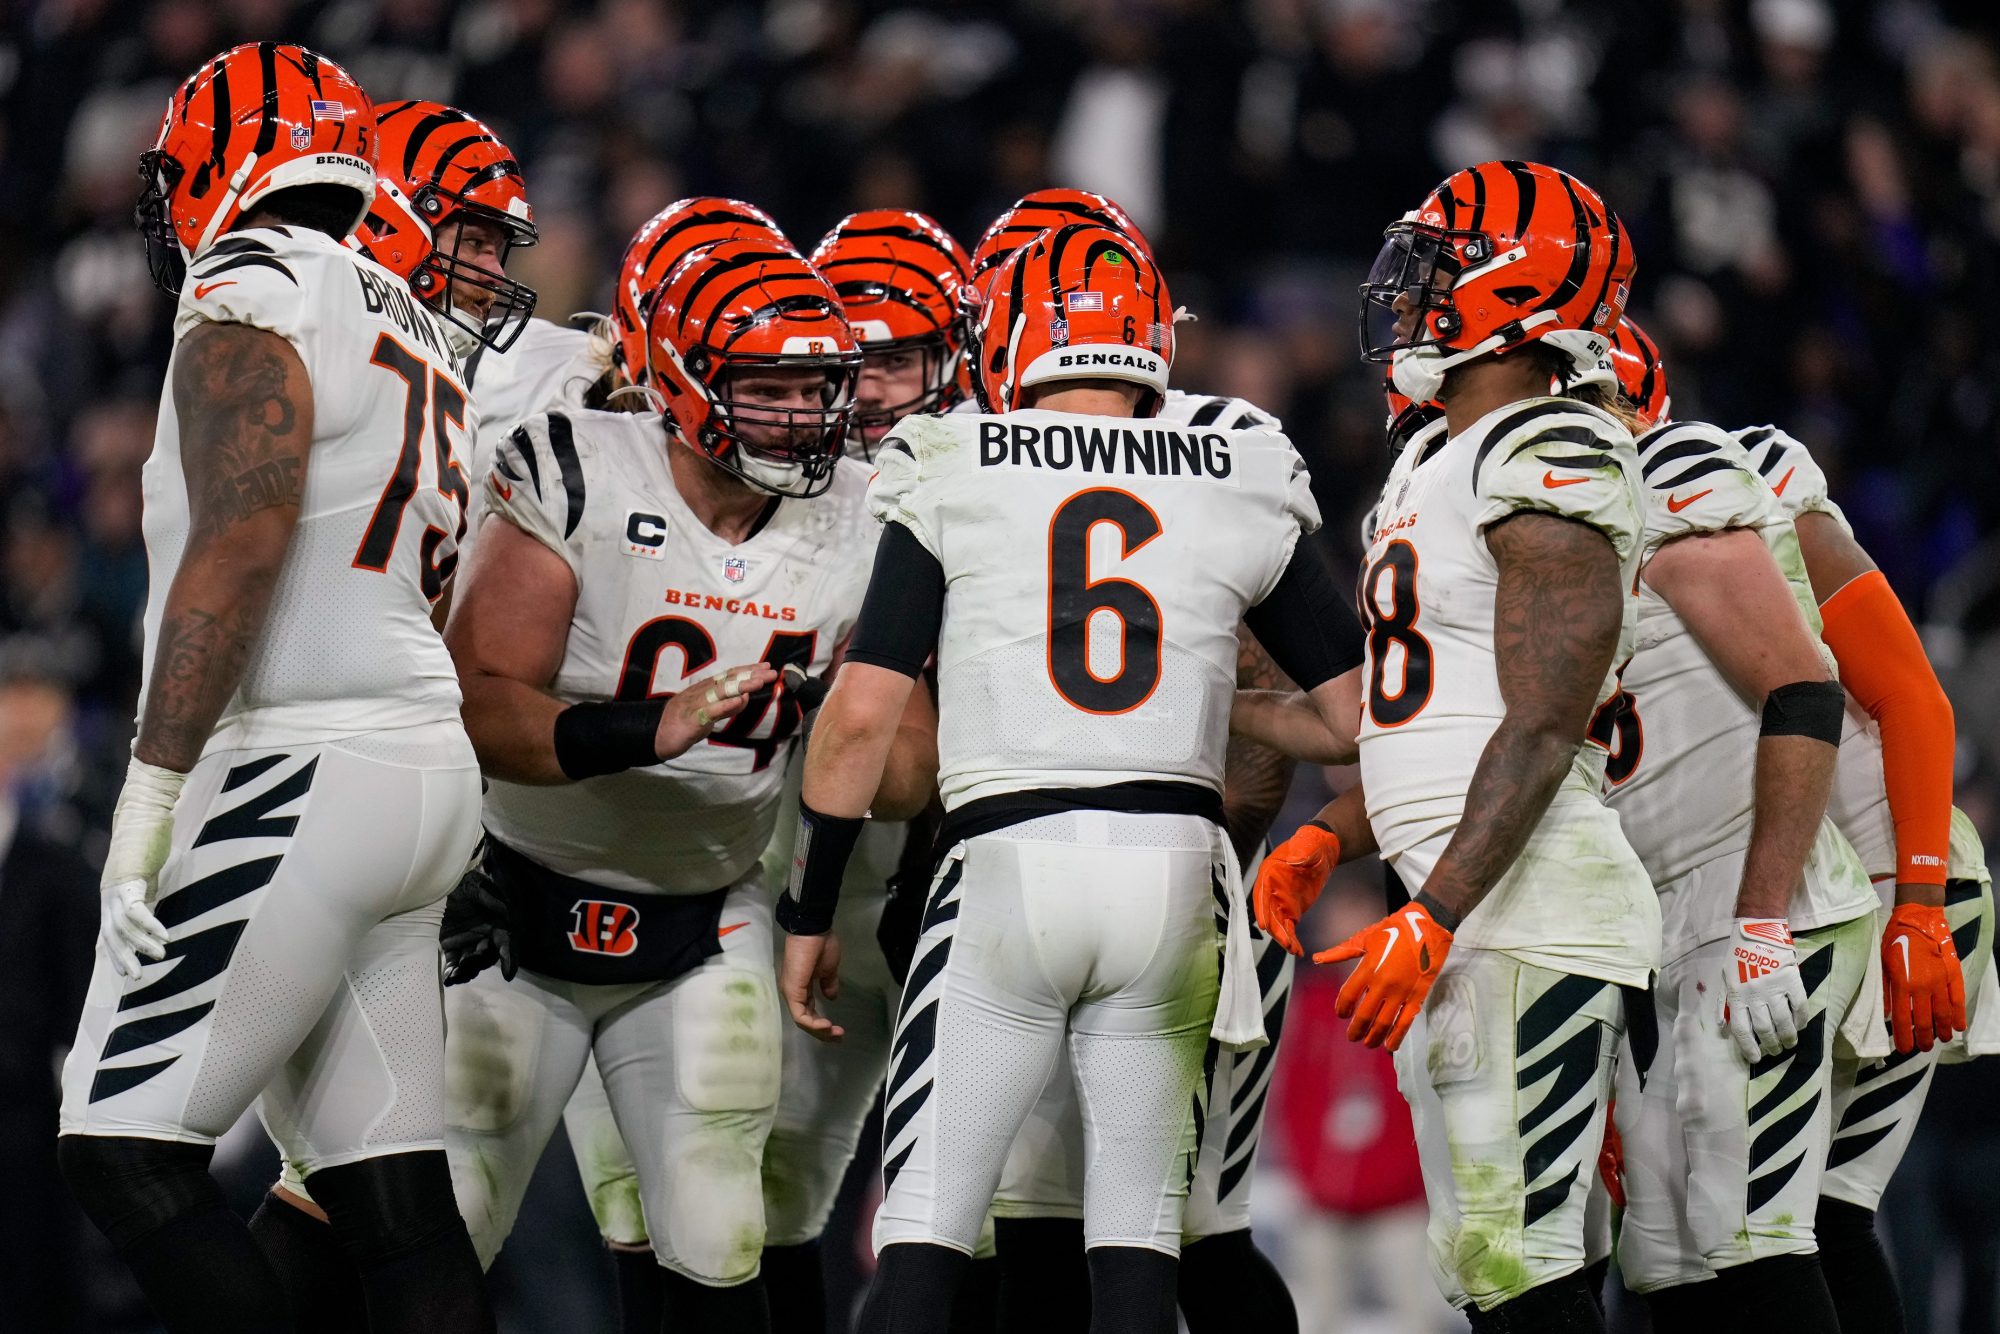 Cincinnati Bengals quarterback Jake Browning (6) stands in the huddle in the fourth quarter of the NFL Week 11 game between the Baltimore Ravens and the Cincinnati Bengals at M&T Bank Stadium in Baltimore on Thursday, Nov. 16, 2023. The Bengals fell to the Ravens, 34-20.